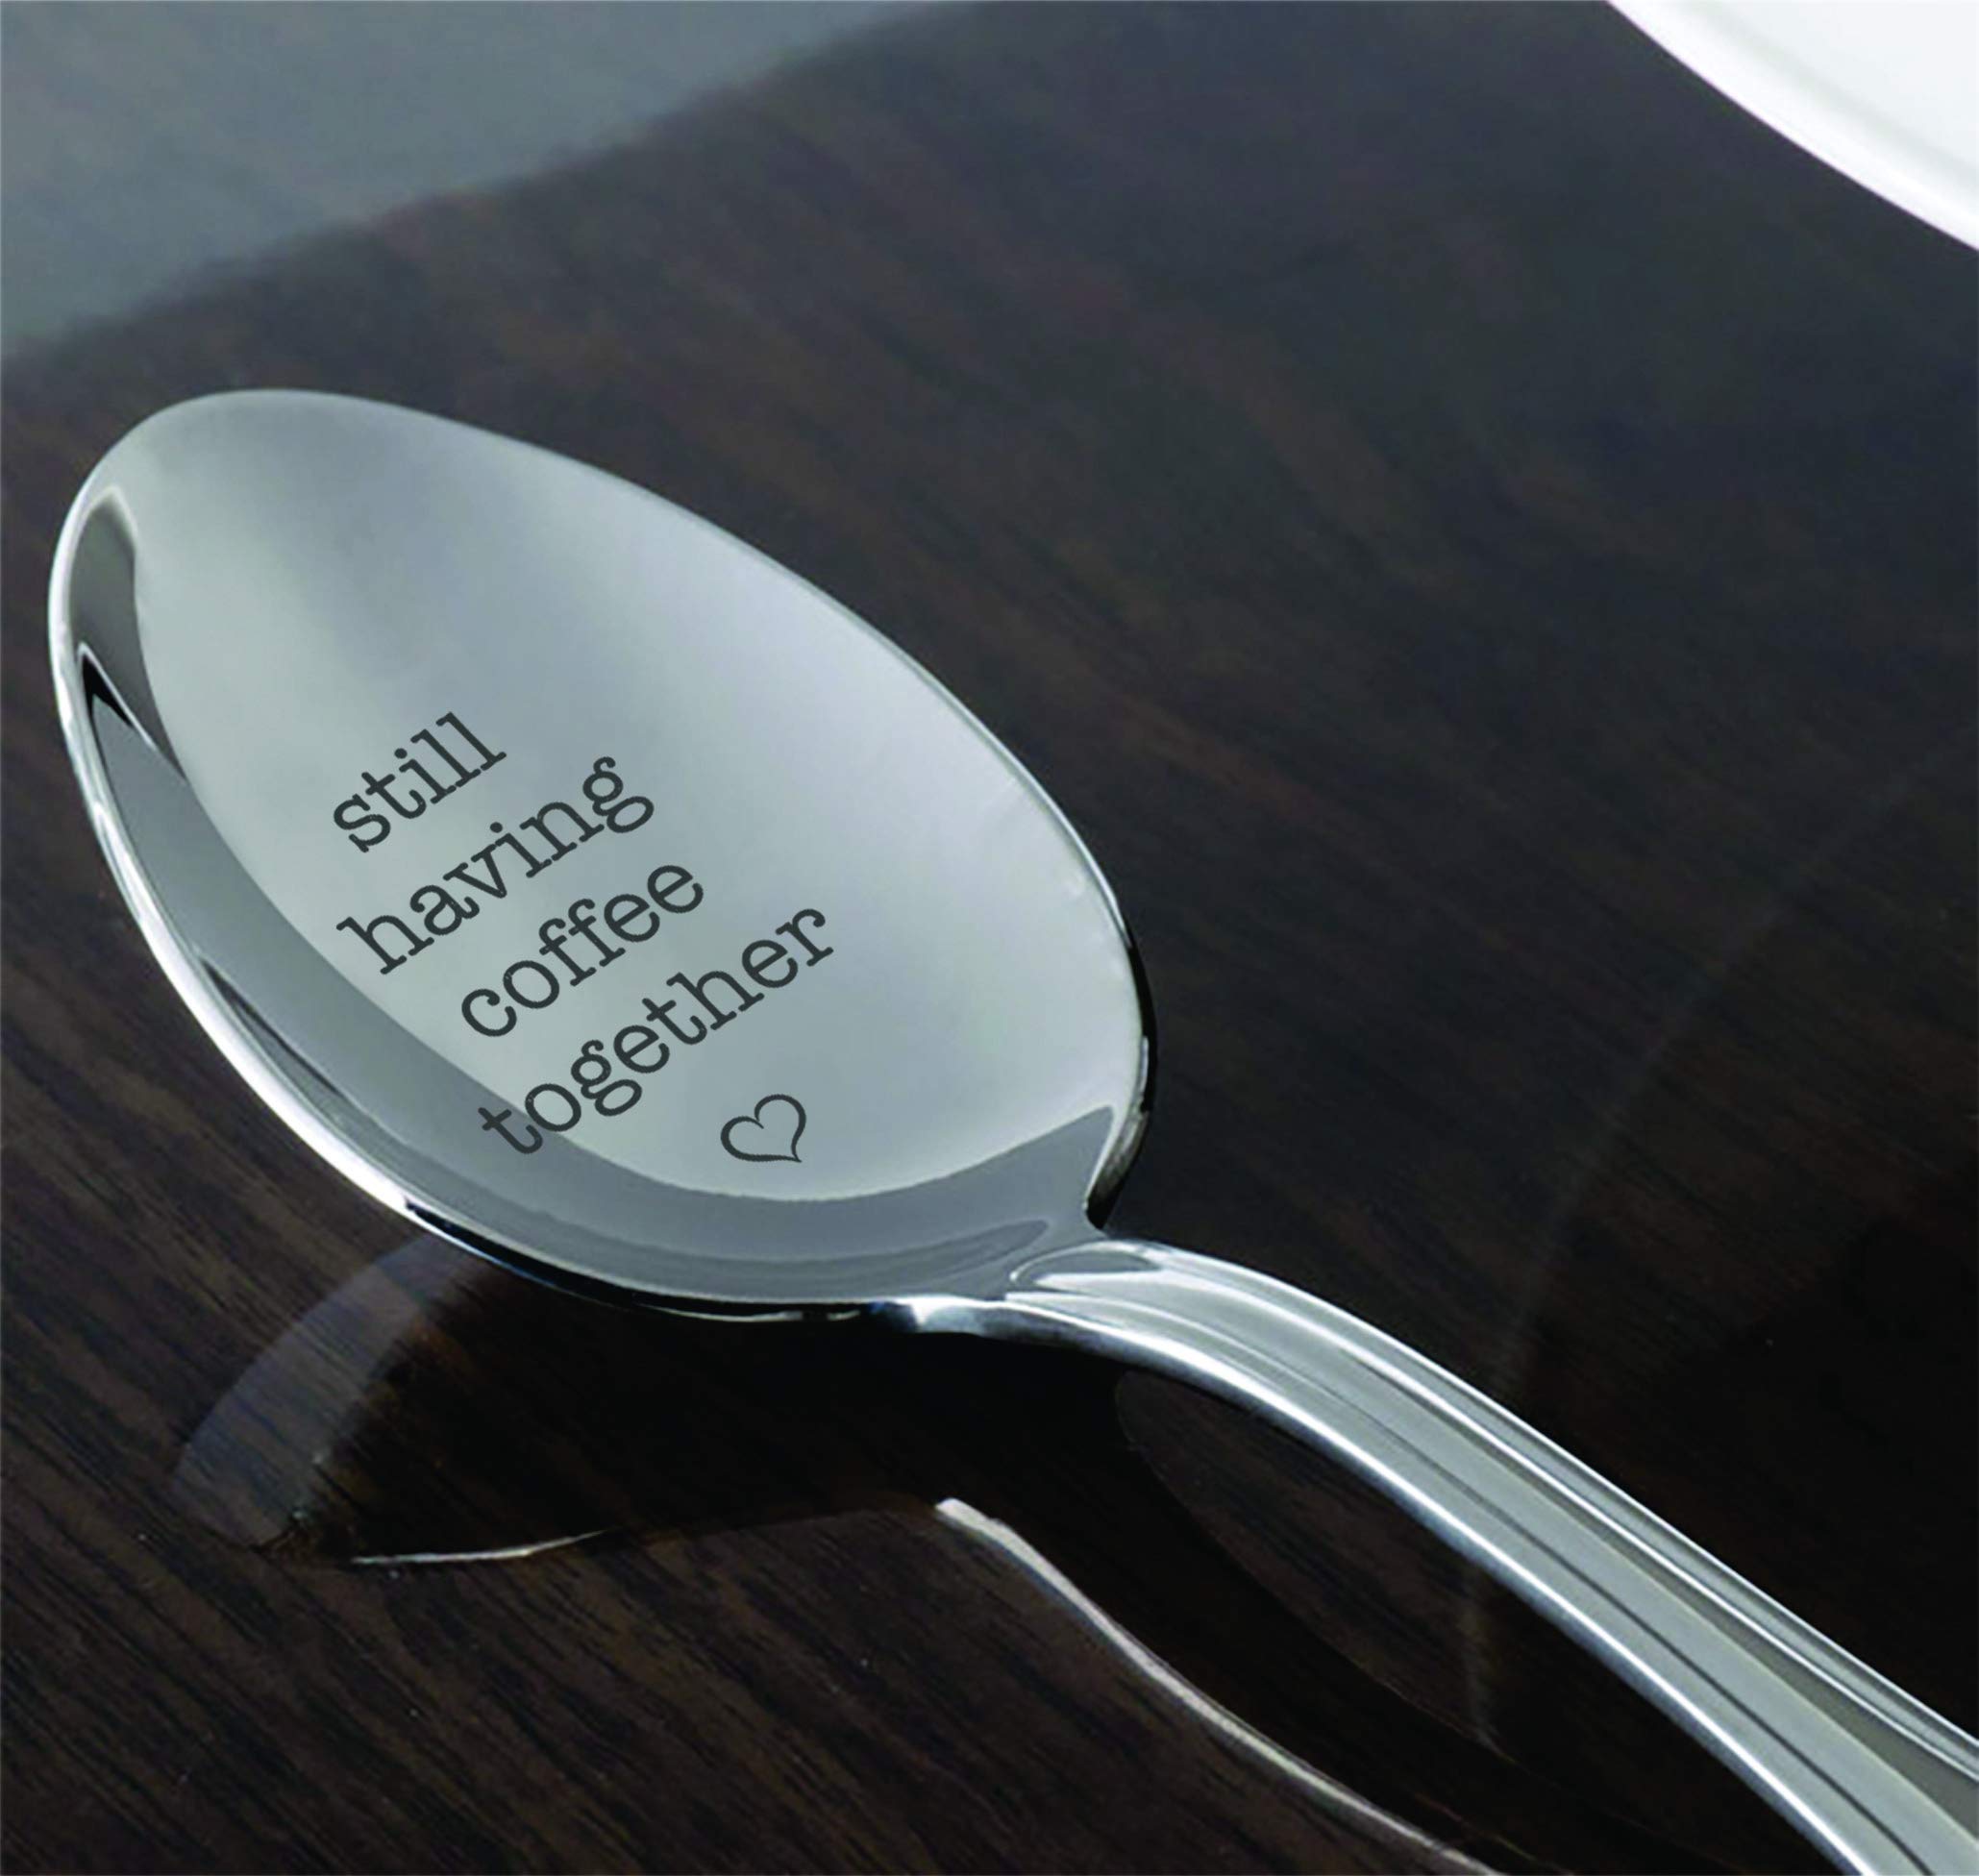 Still Having Coffee Together With Heart Design Engraved Stainless Steel Espresso Spoon Gifts For Friends Couples Moving Going Away-Best Token Of Love For Coffee Lovers From Boston Creative Company